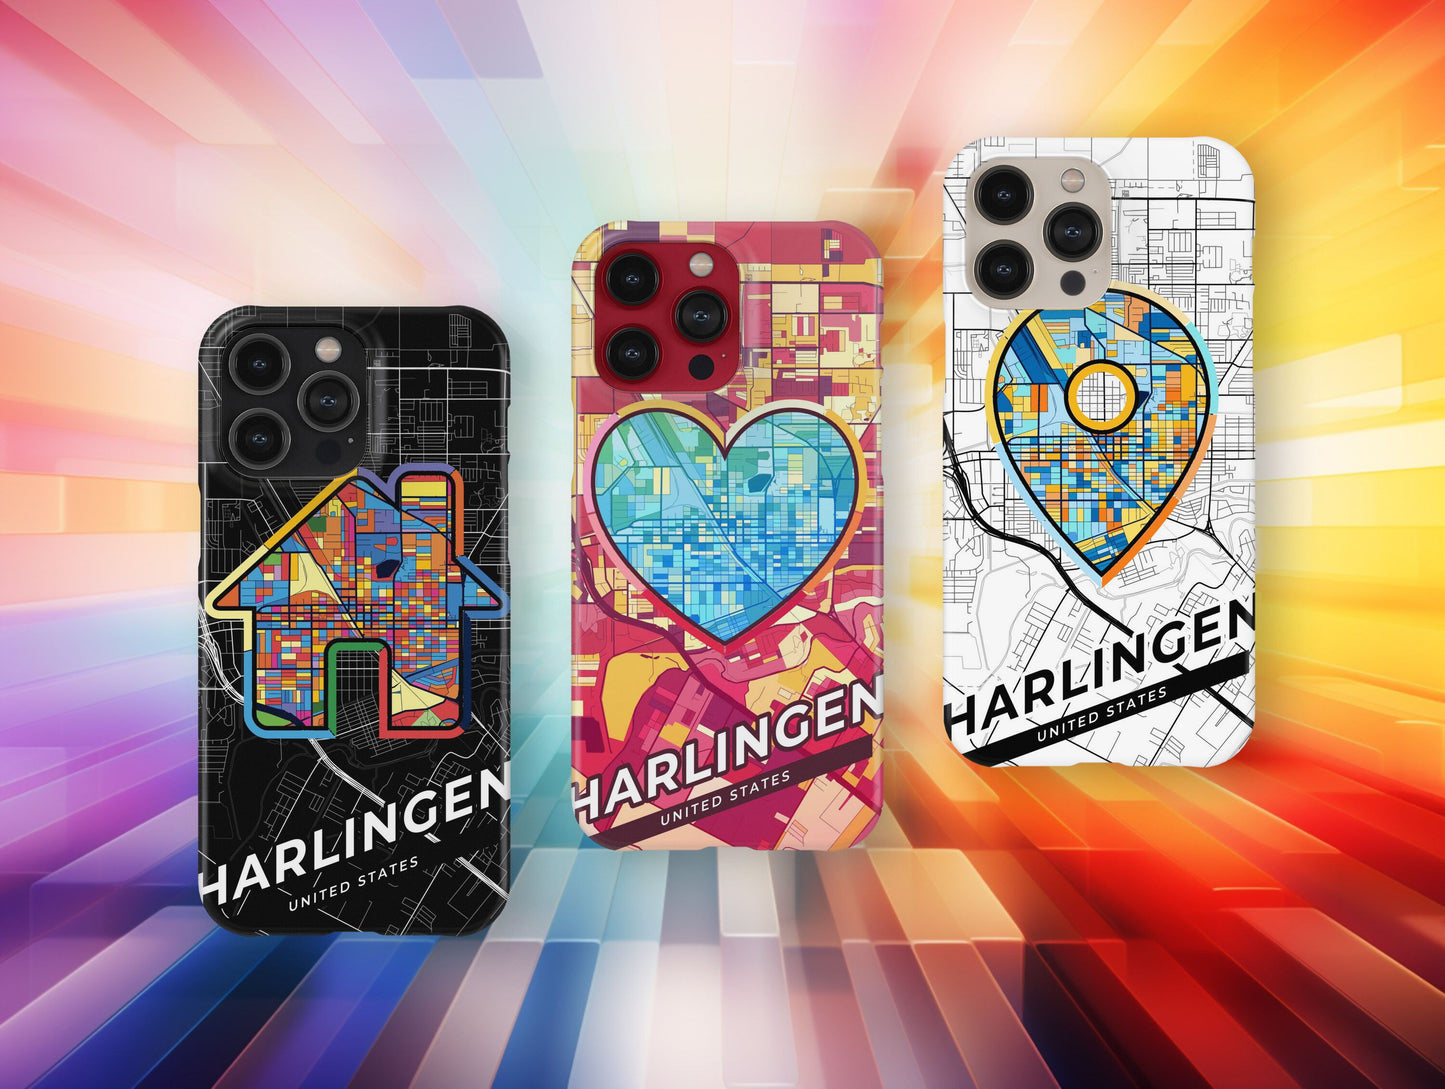 Harlingen Texas slim phone case with colorful icon. Birthday, wedding or housewarming gift. Couple match cases.